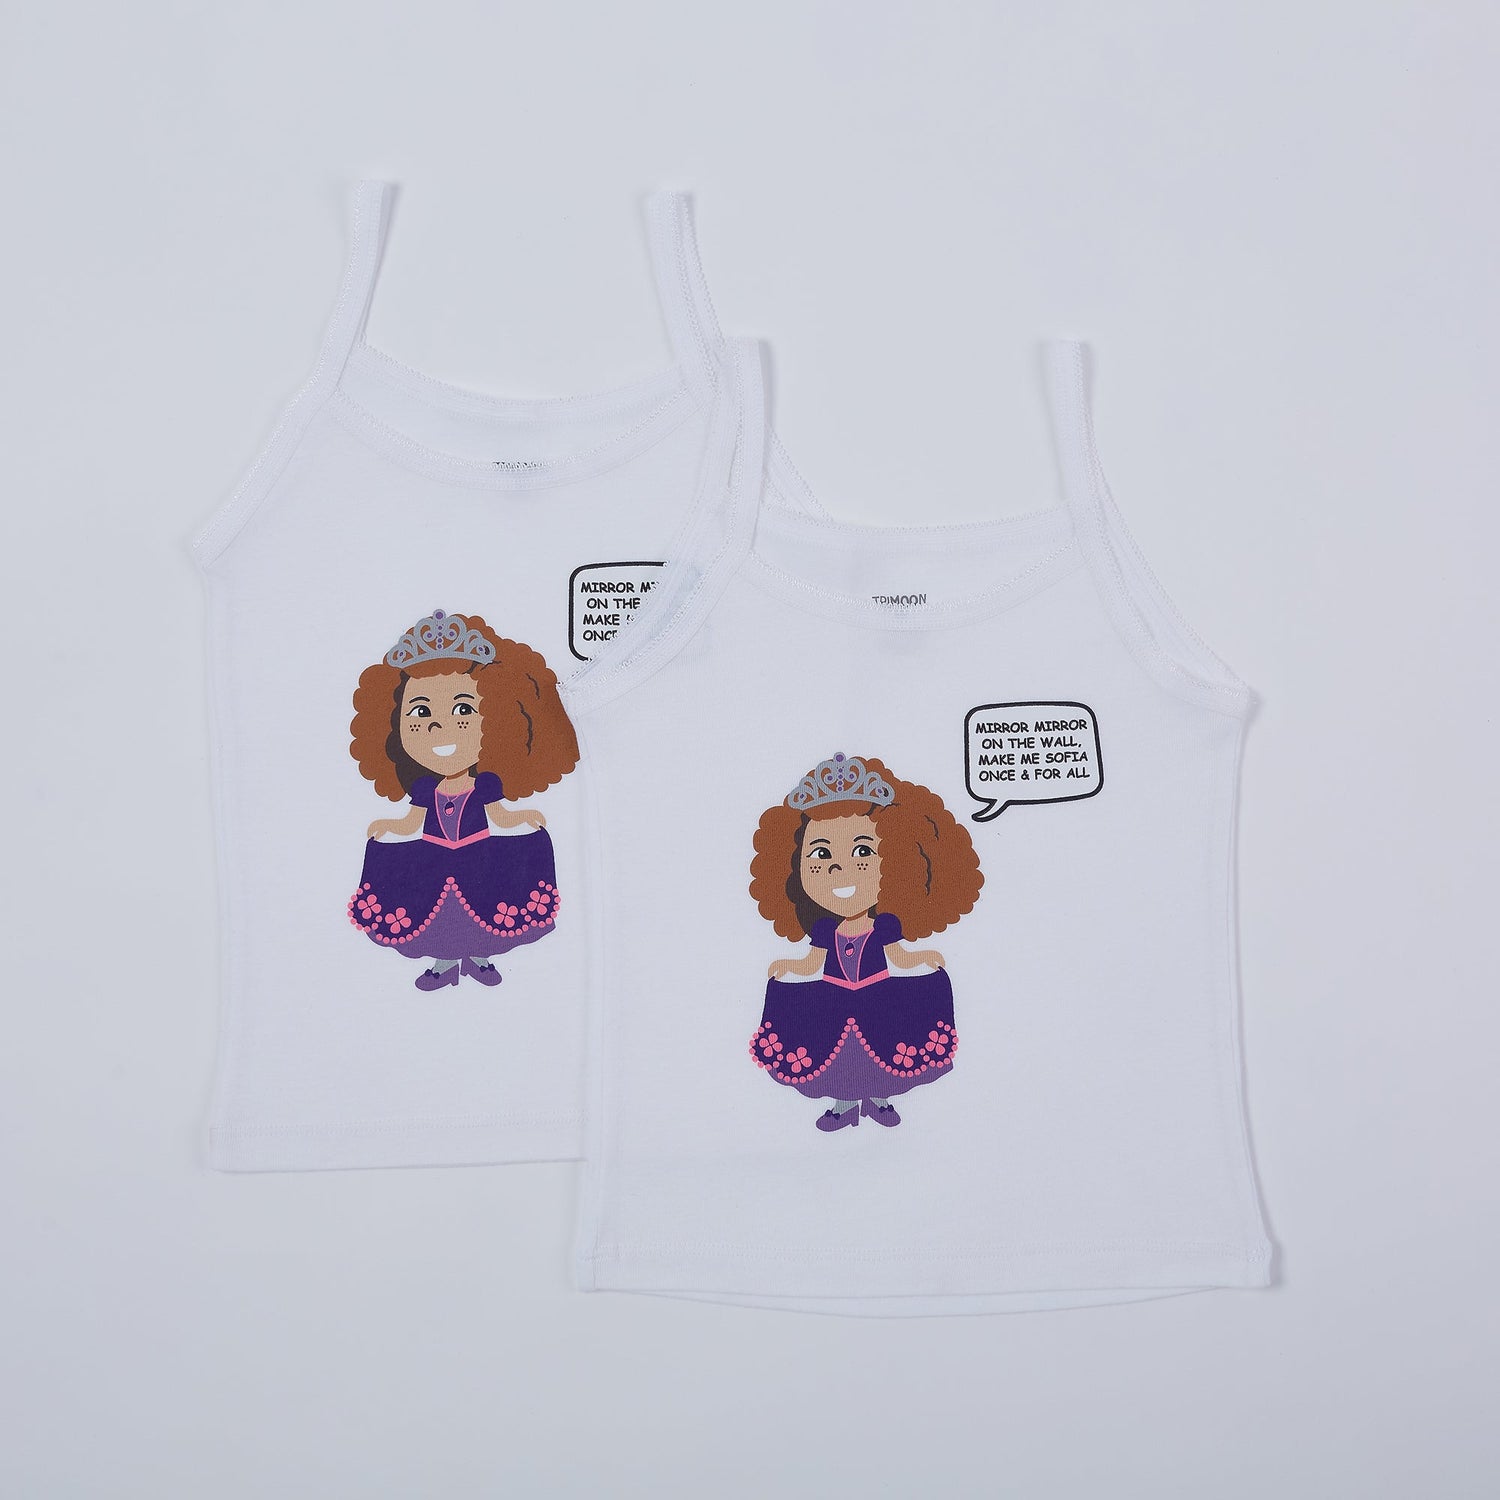 Trimoon Pack of 2 Brand New Undershirts For Girls - The Princess - mymadstore.com